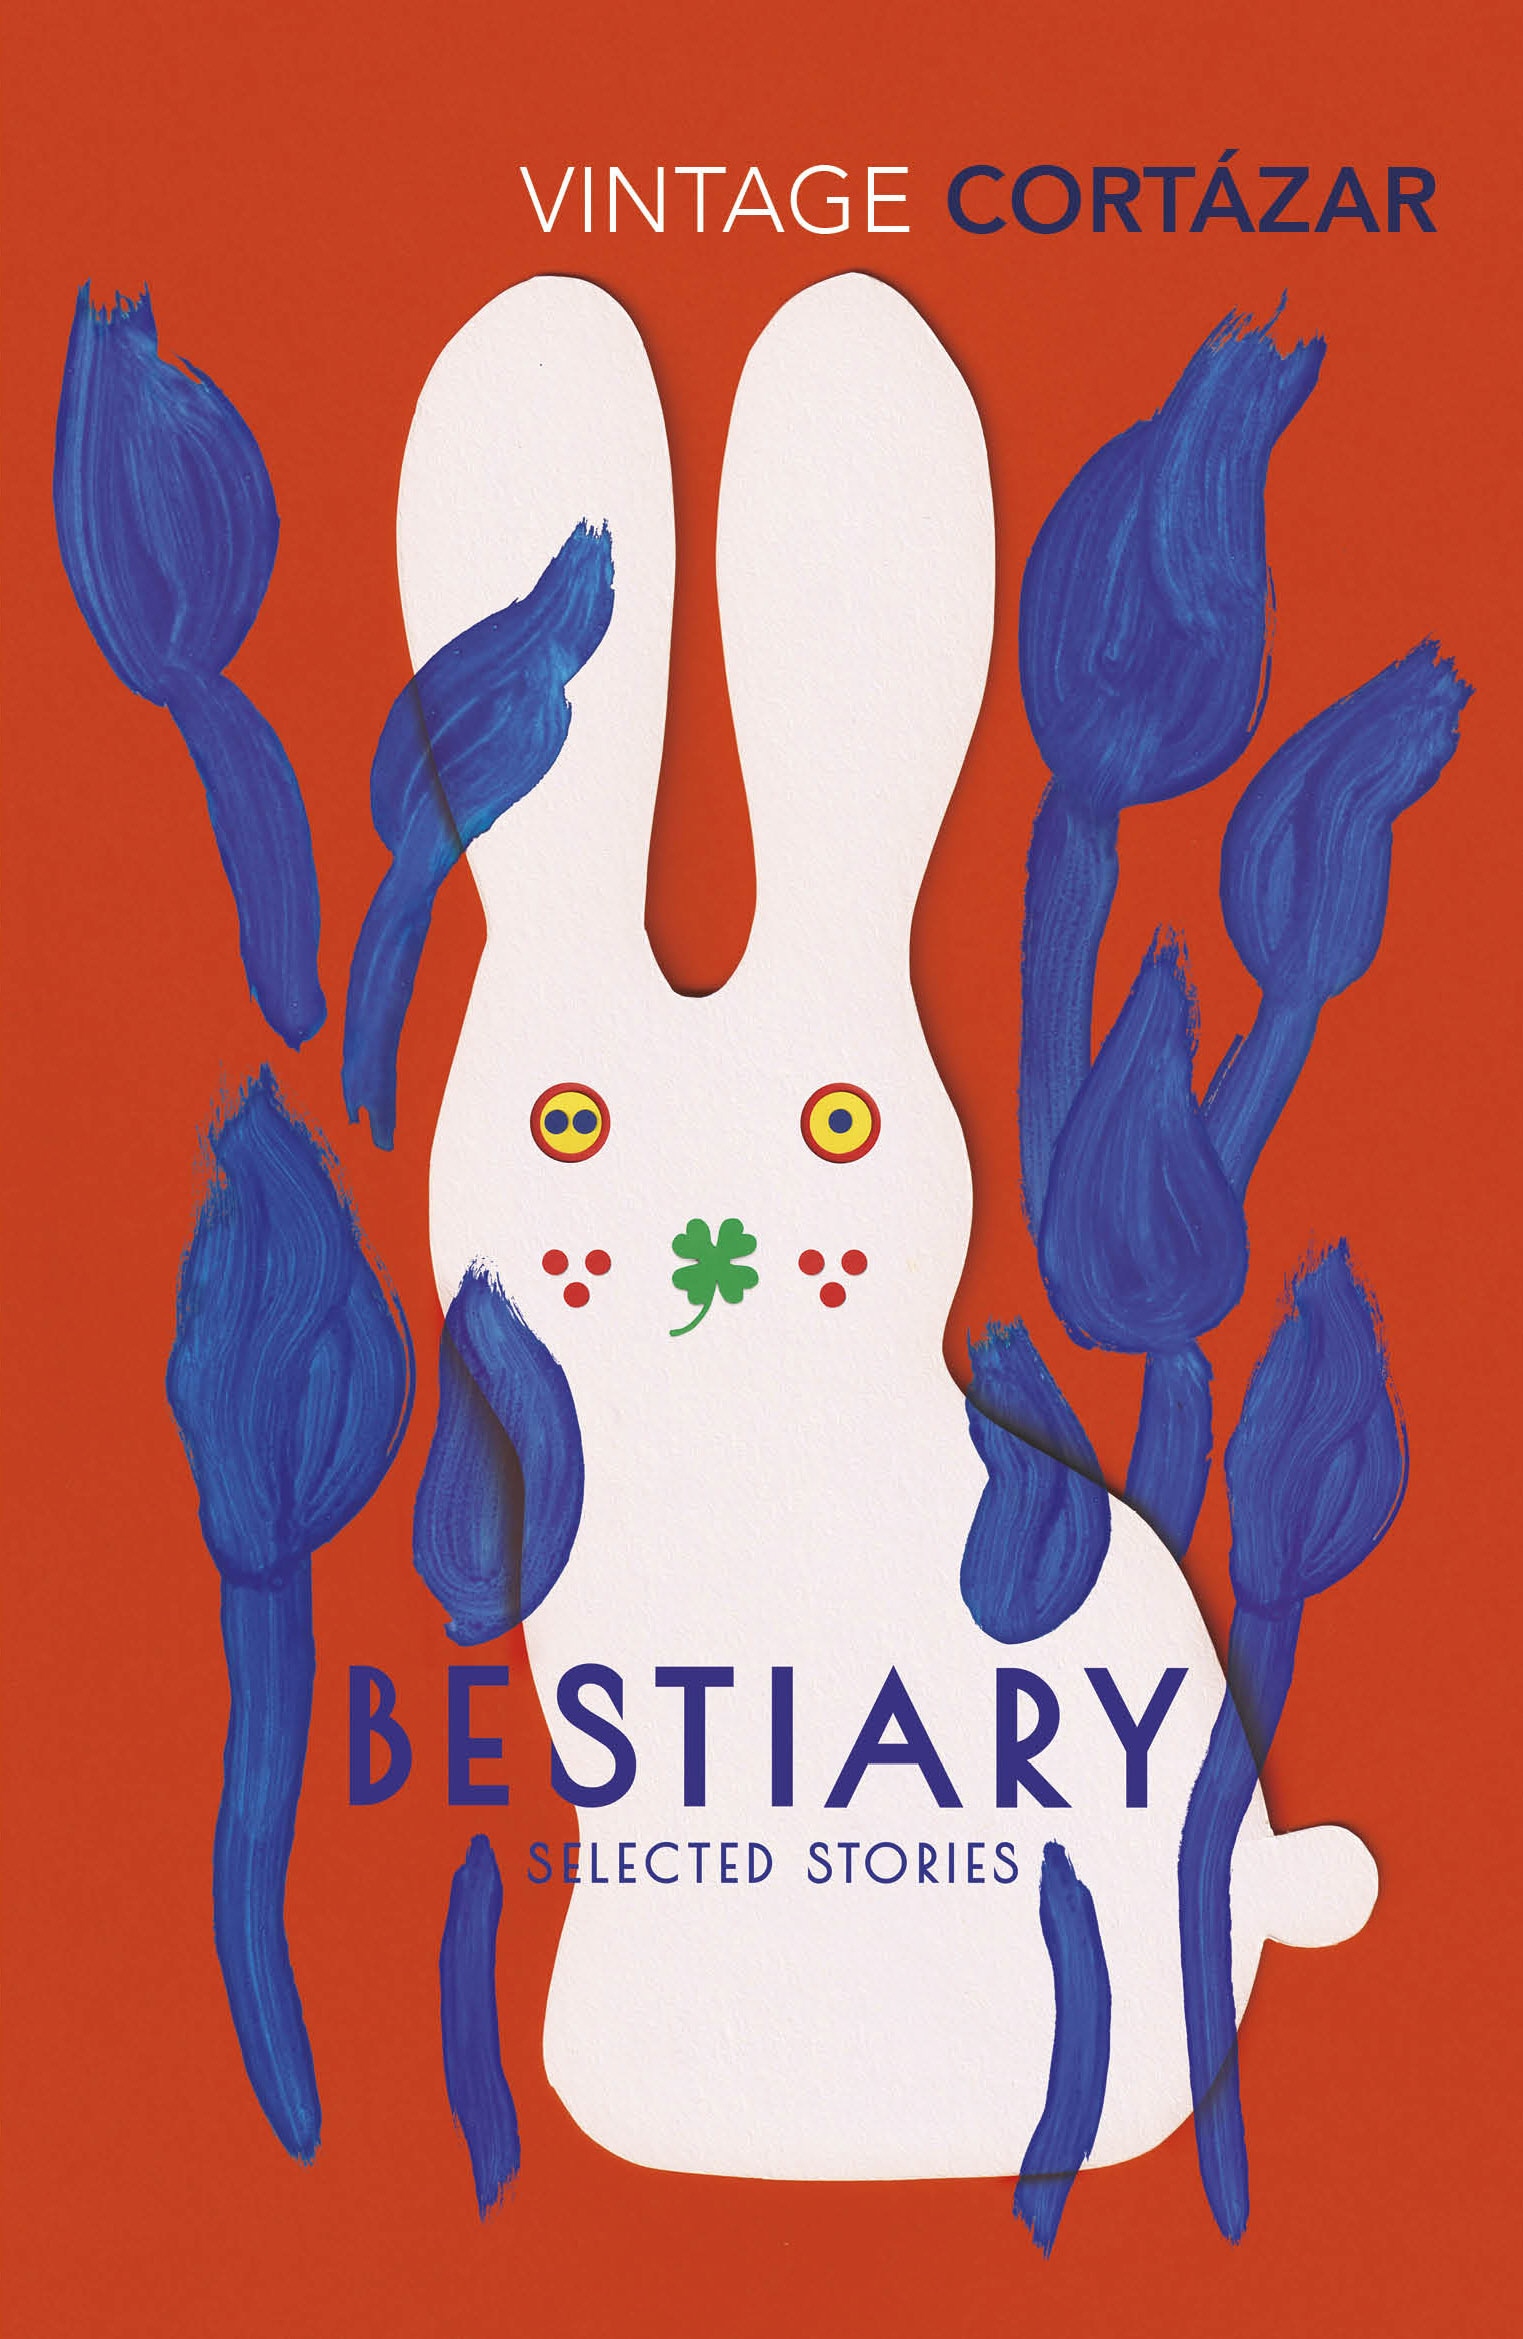 Book “Bestiary” by Julio Cortazar, Kevin Barry — February 6, 2020